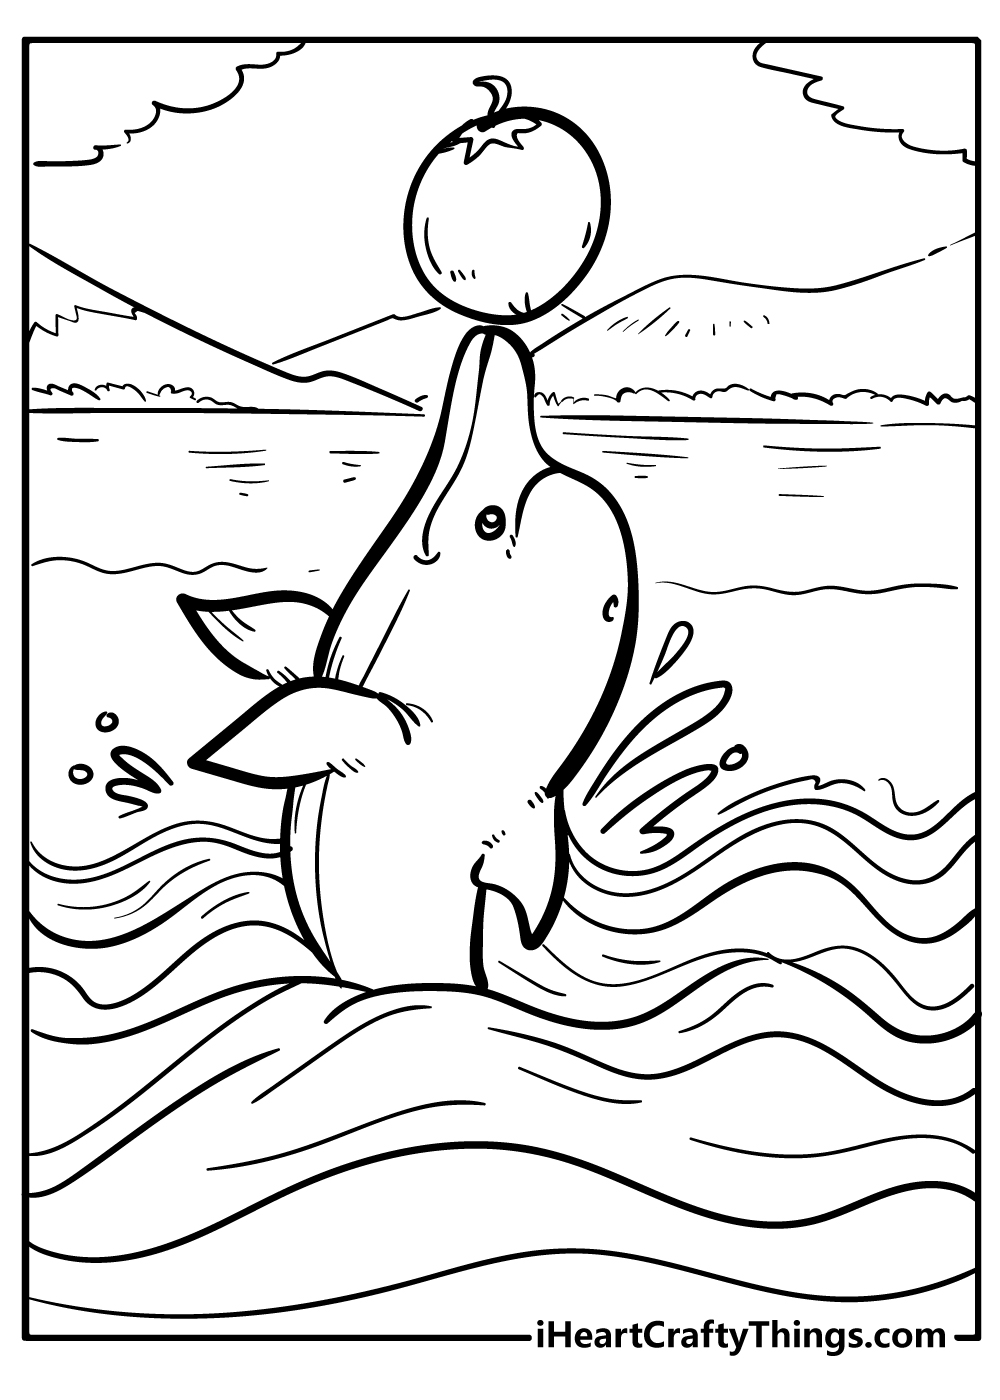 Dolphin coloring pages free printables